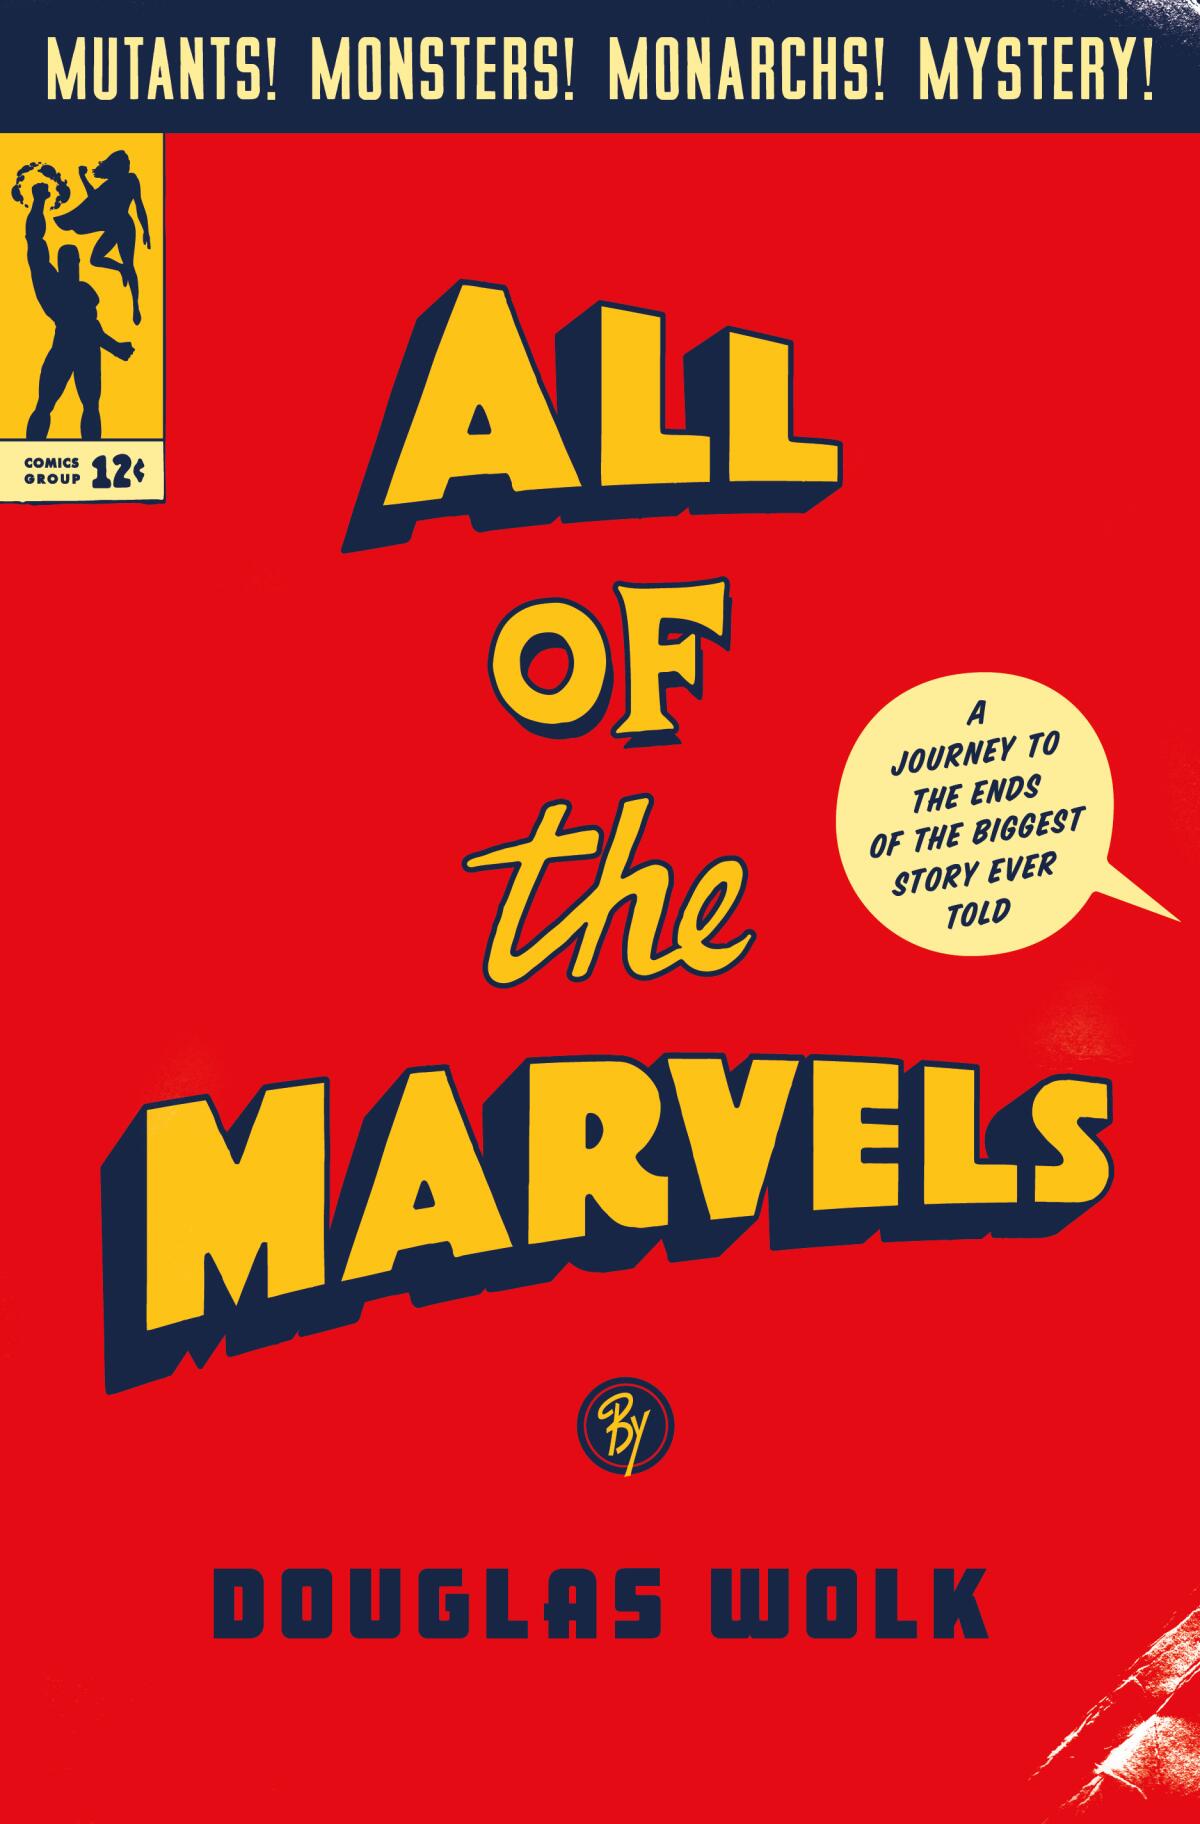 REVIEW: The Marvels #1 has ambitious, sprawling intentionsbut does it  realize them? — Comics Bookcase